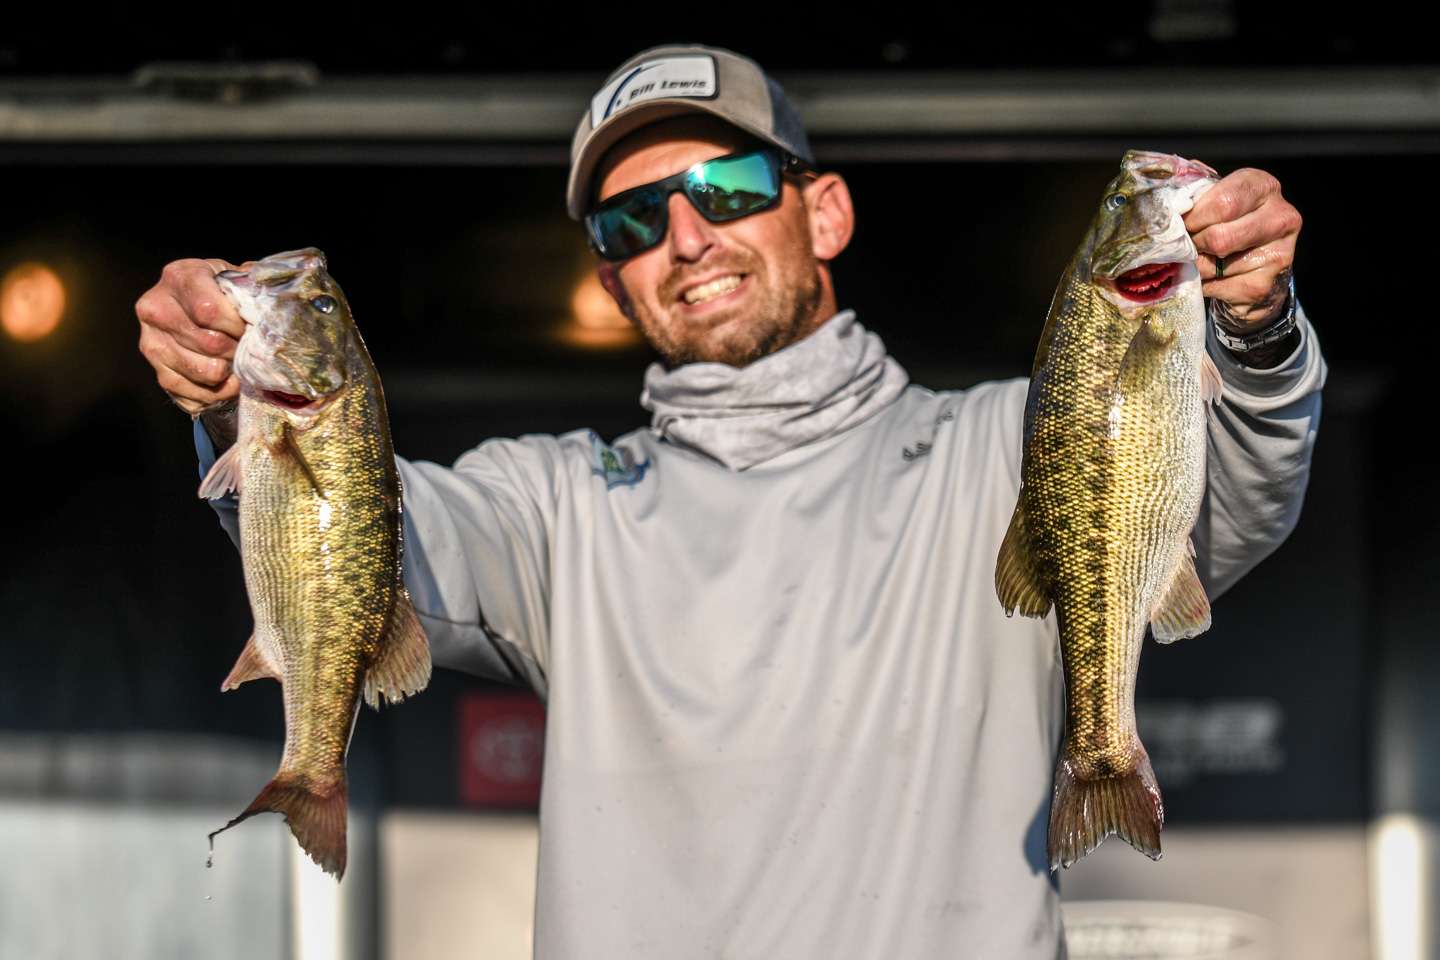 Skyler Browning, 11th place co-angler (6-11)